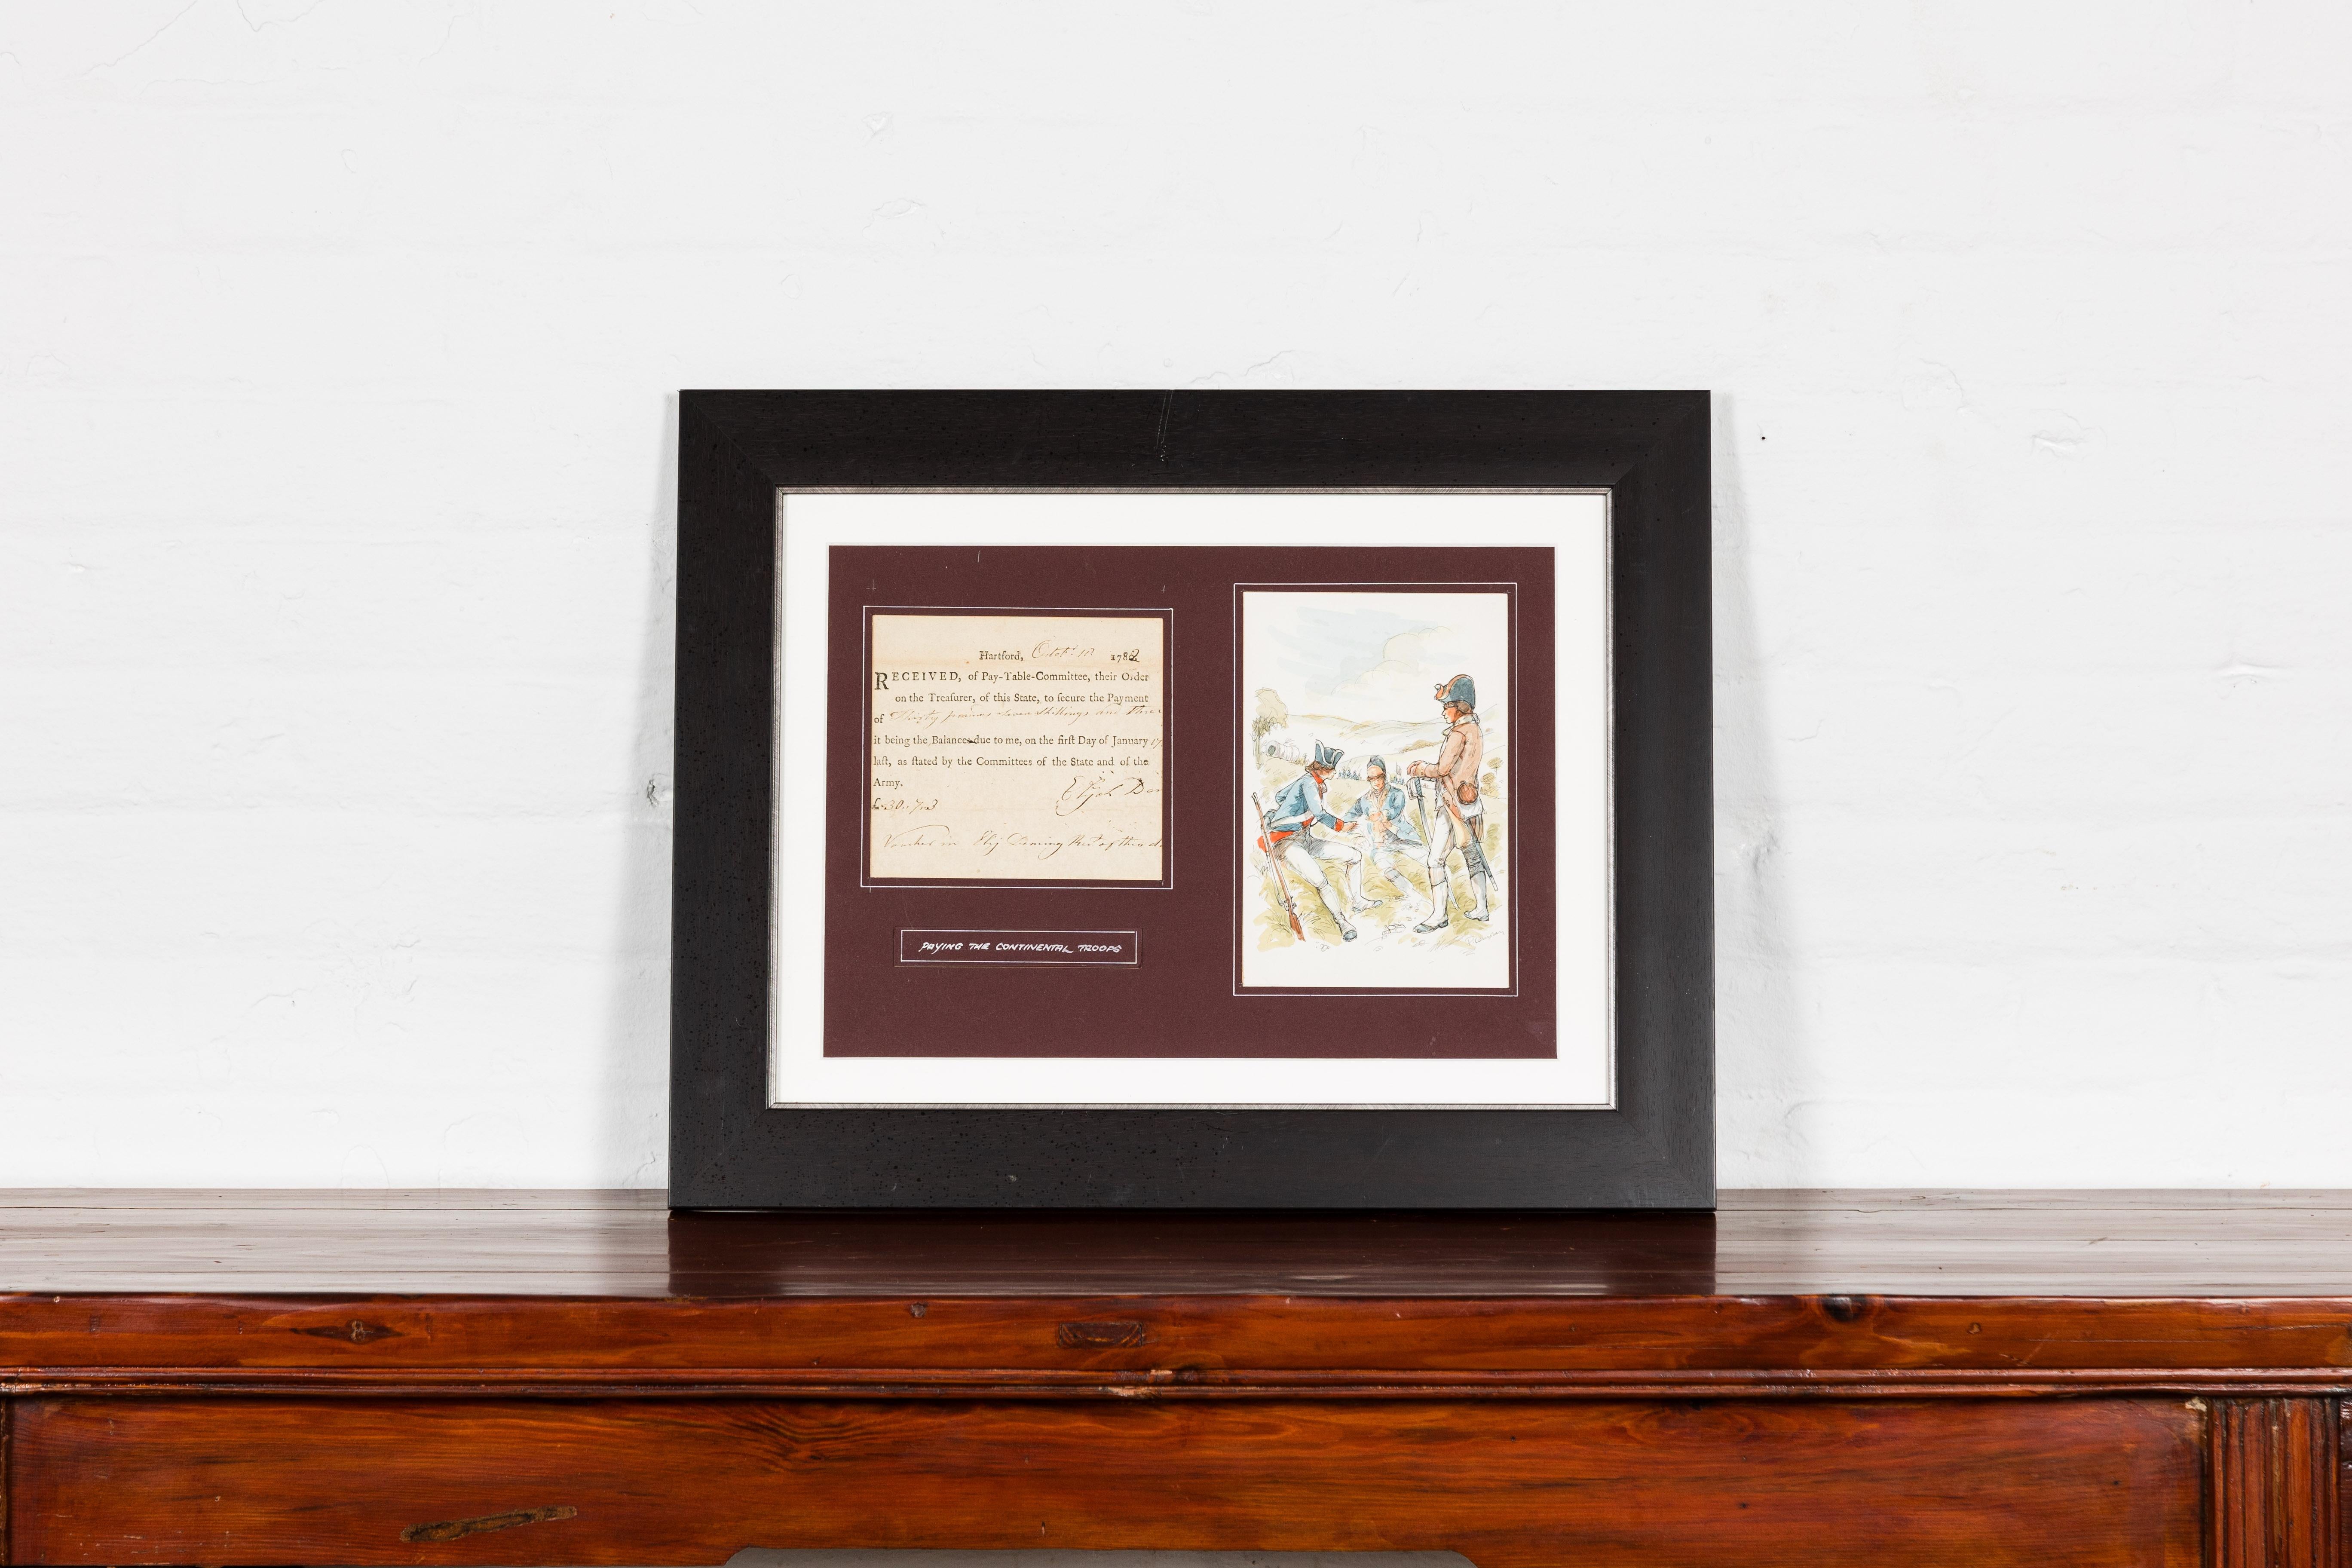 An American Revolutionary war bond from the State of Connecticut from the late 18th century in custom black frame under glass. From the poignant tapestry of America's Revolutionary past emerges this Connecticut Revolutionary War bond set in a custom